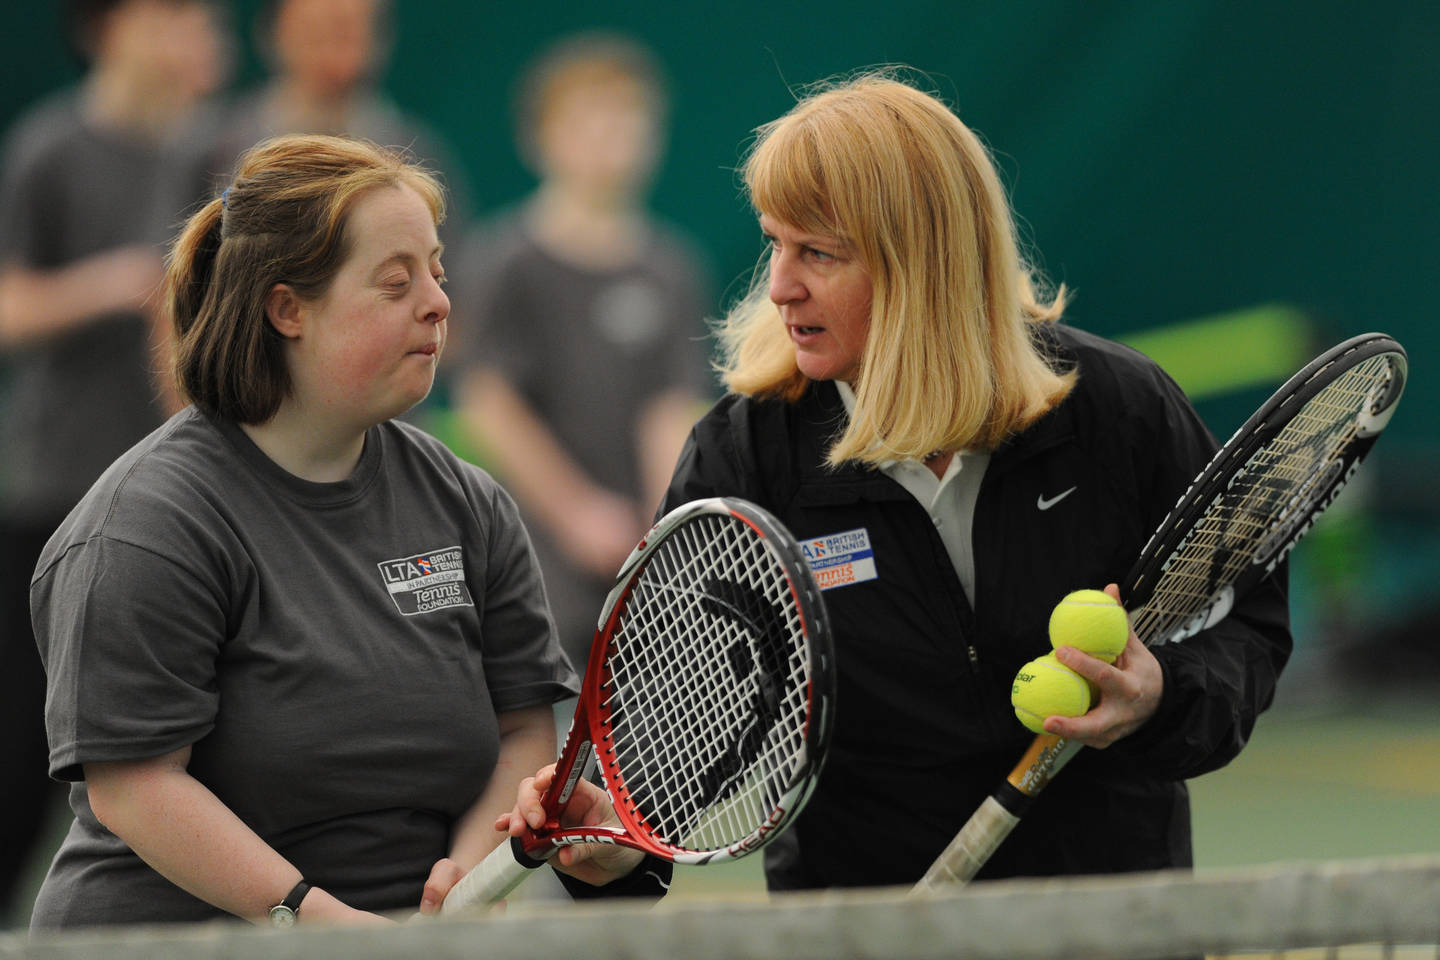 Players with visual impairments playing tennis